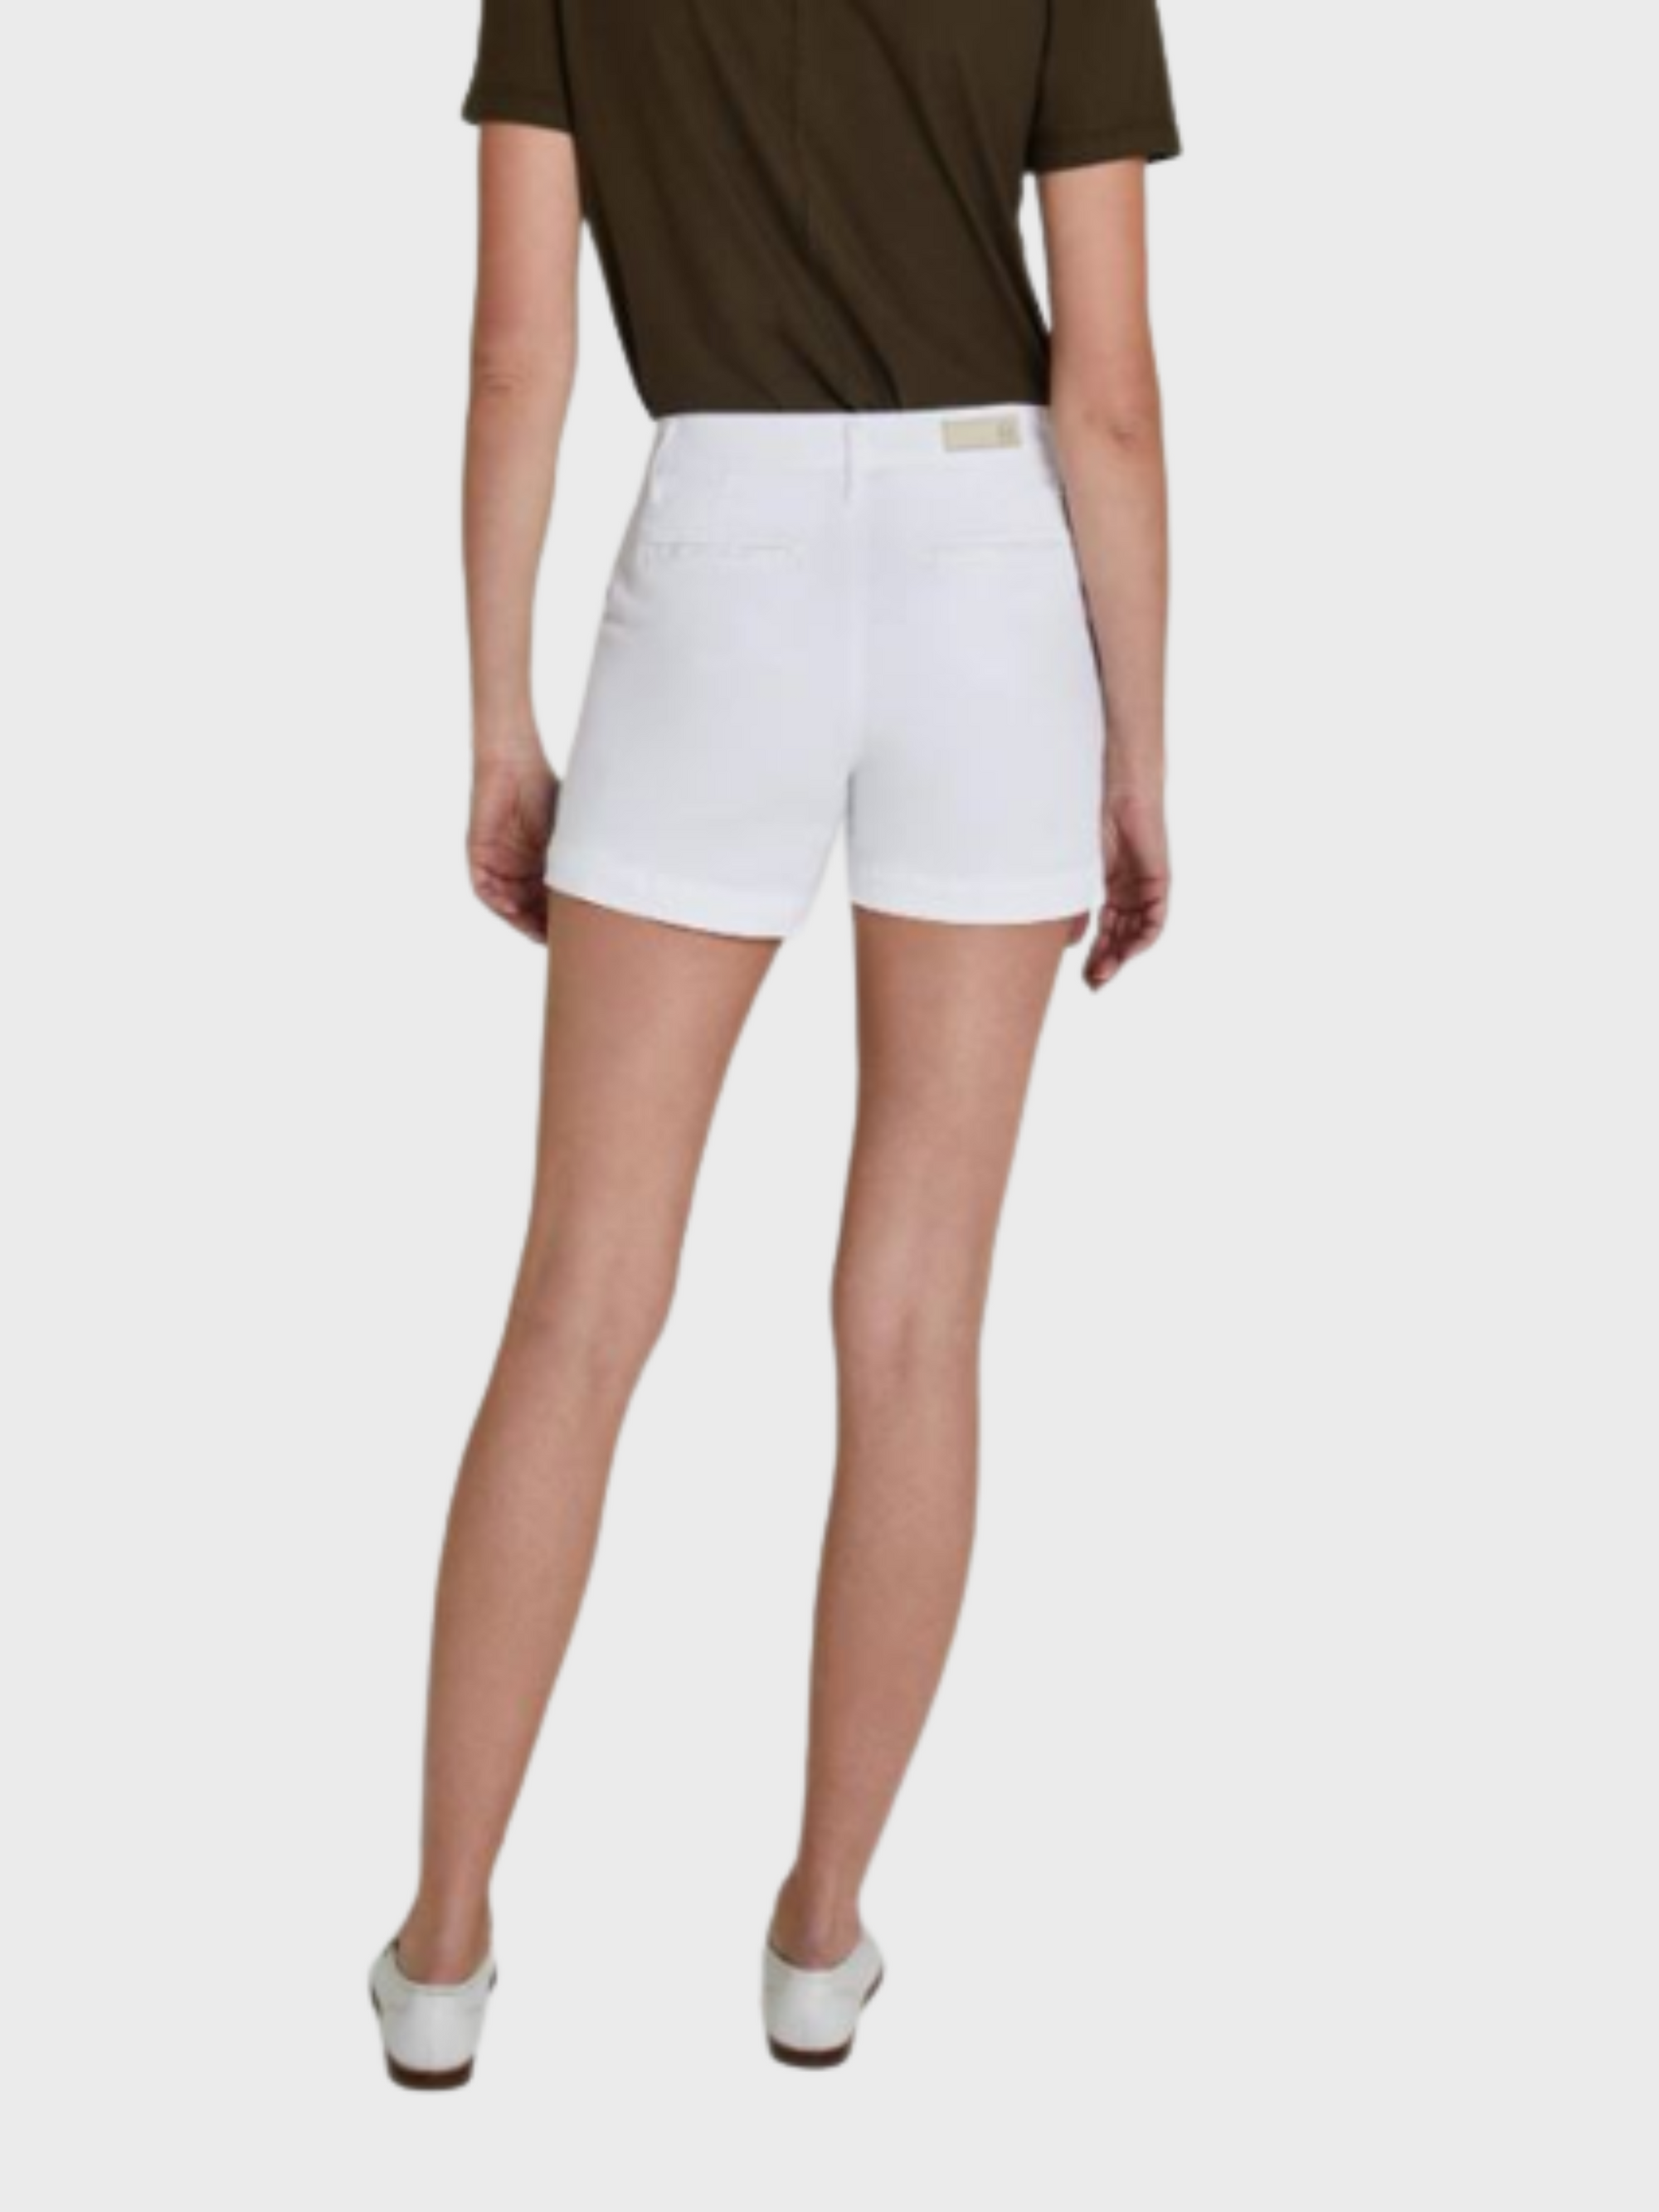 AG Jeans - Caden Short - White-Shorts-West of Woodward Boutique-Vancouver-Canada